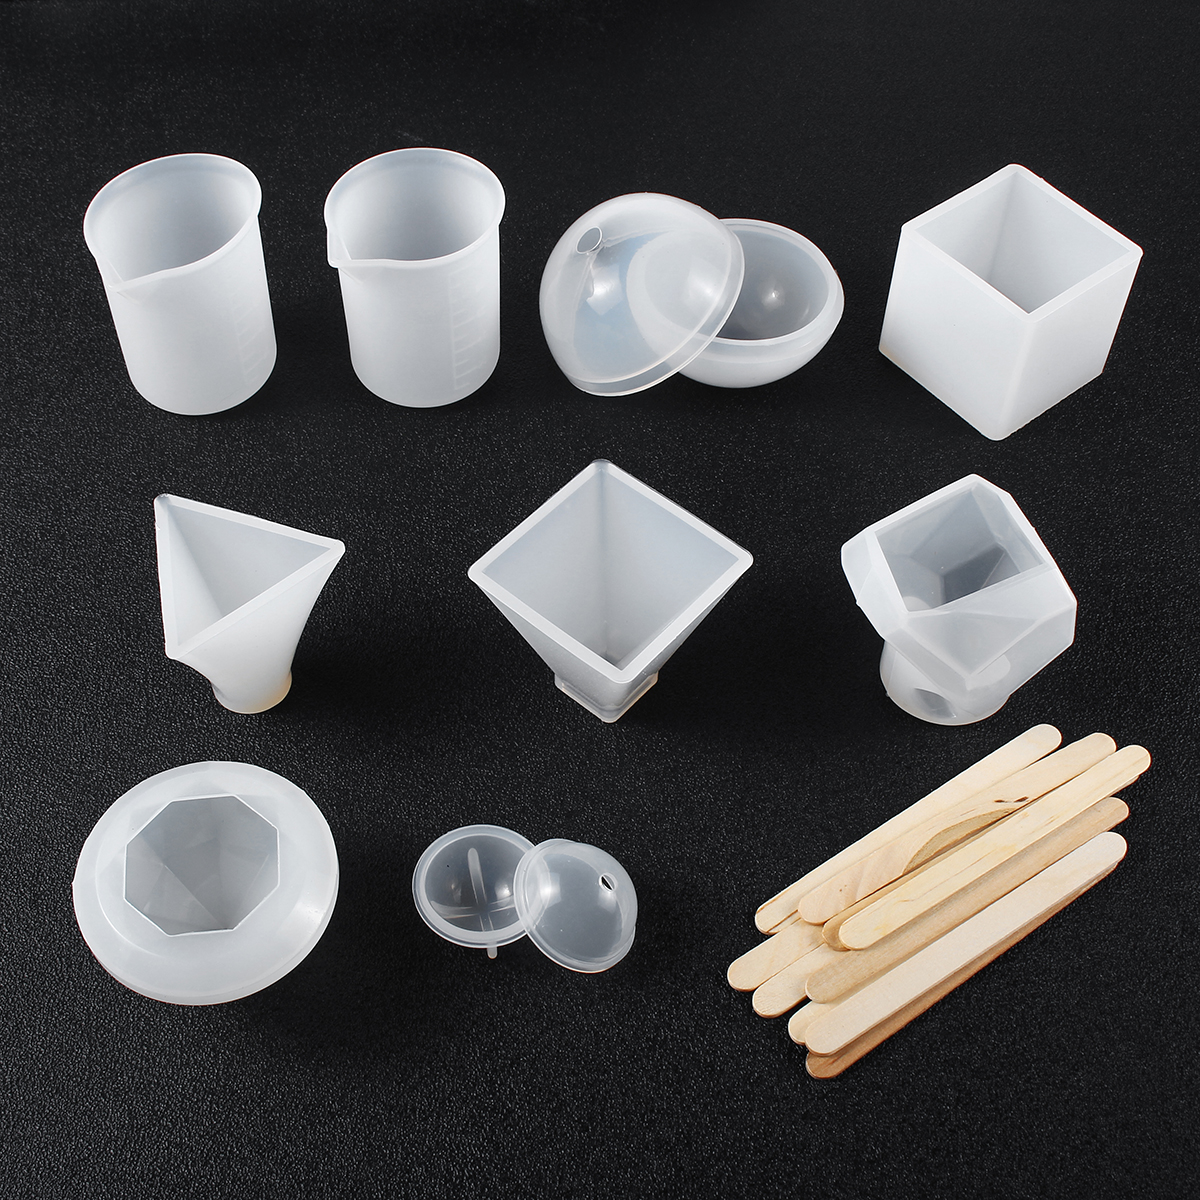 

19PCS DIY Resin Casting Molds Silicone Jewelry Pendant Craft Making Mould Tool